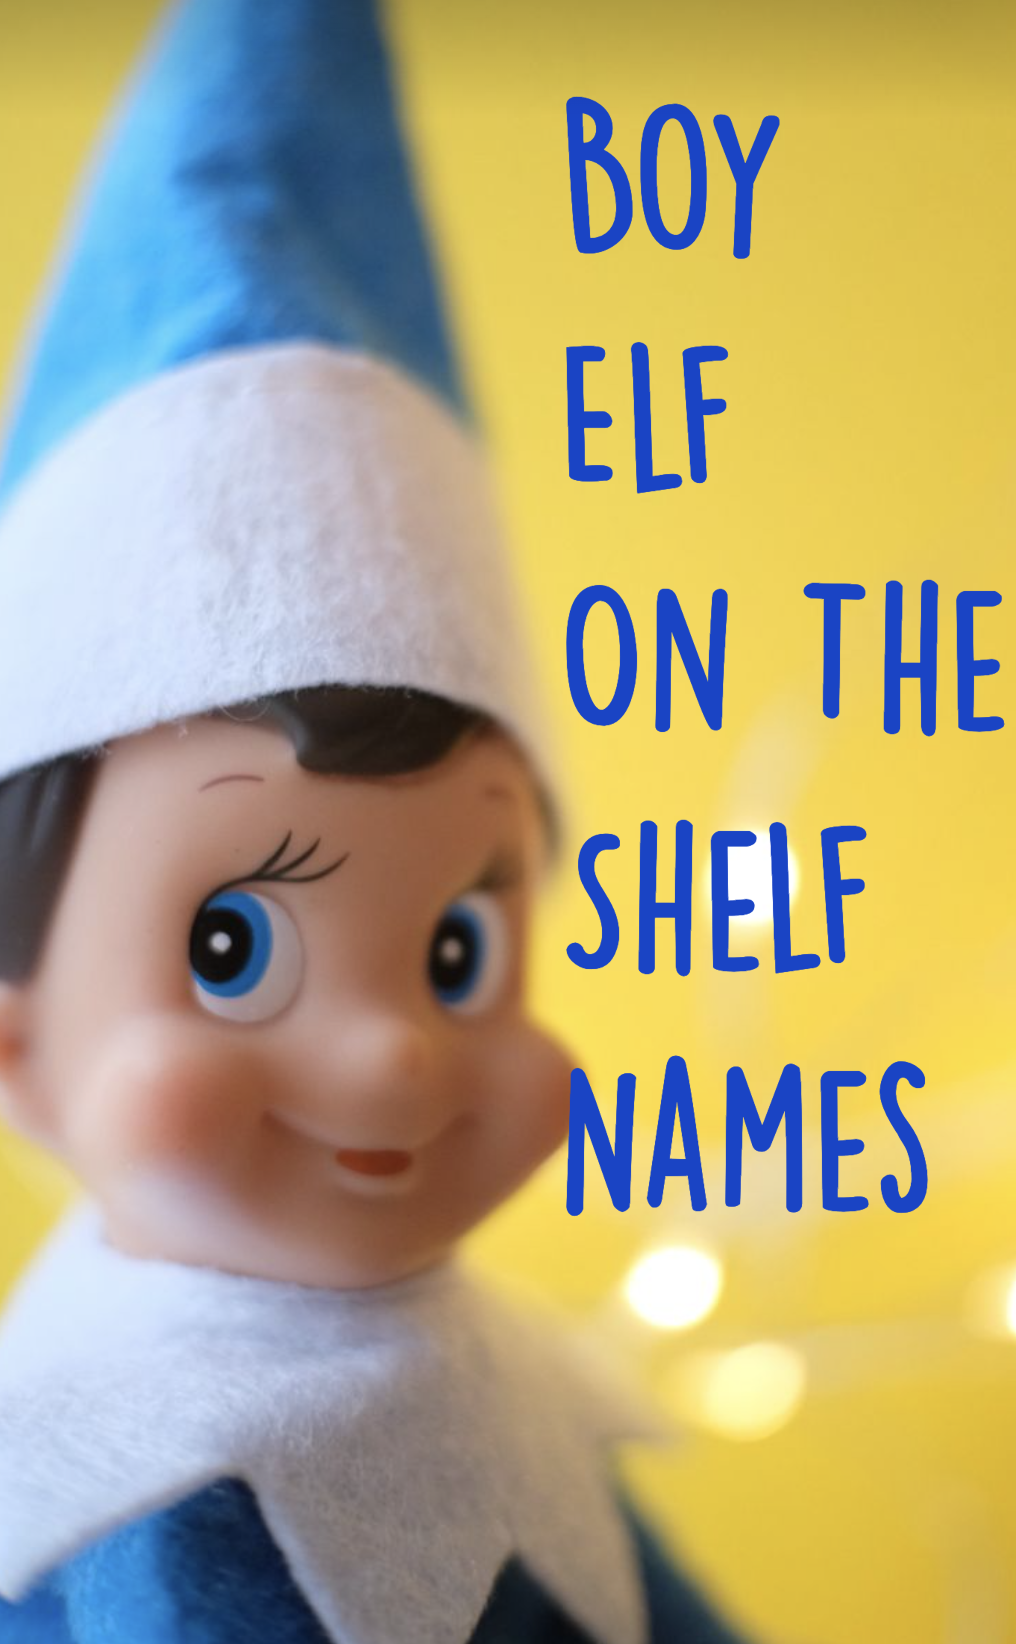 What Happens If Your Parents Touch Your Elf On The Shelf